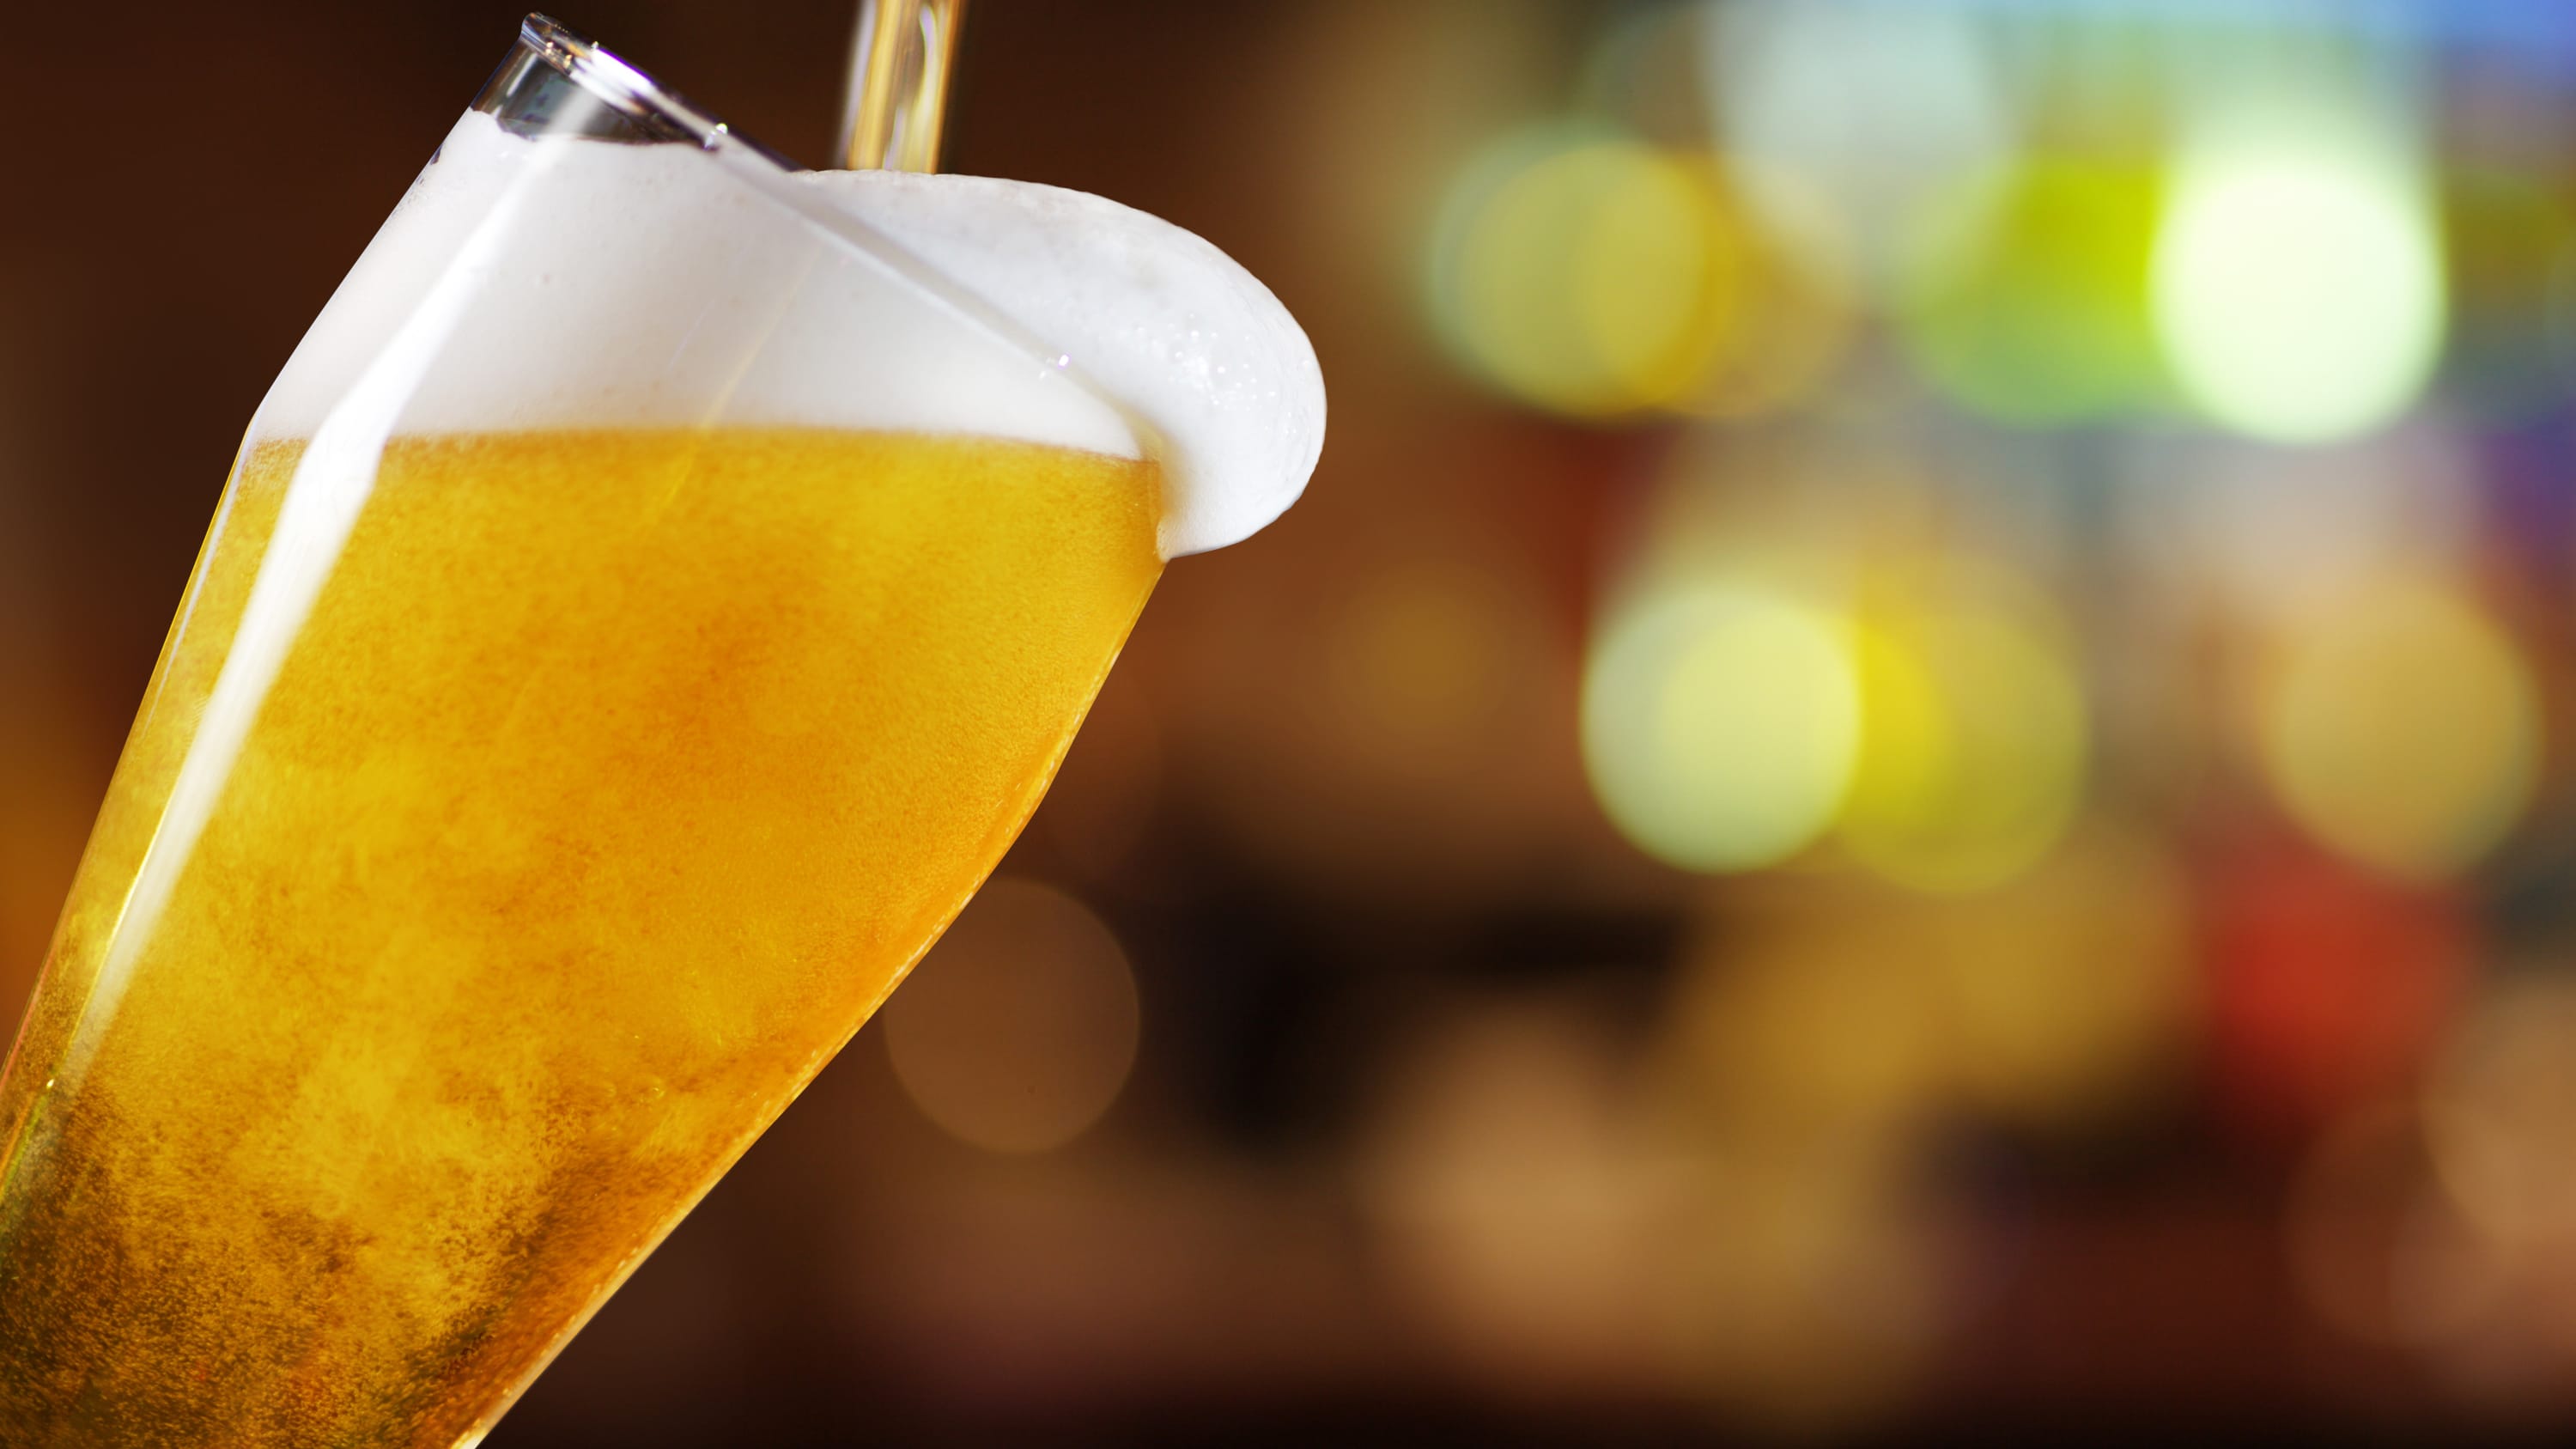 beer, along with other alcoholic drinks, may lead to liver disease.